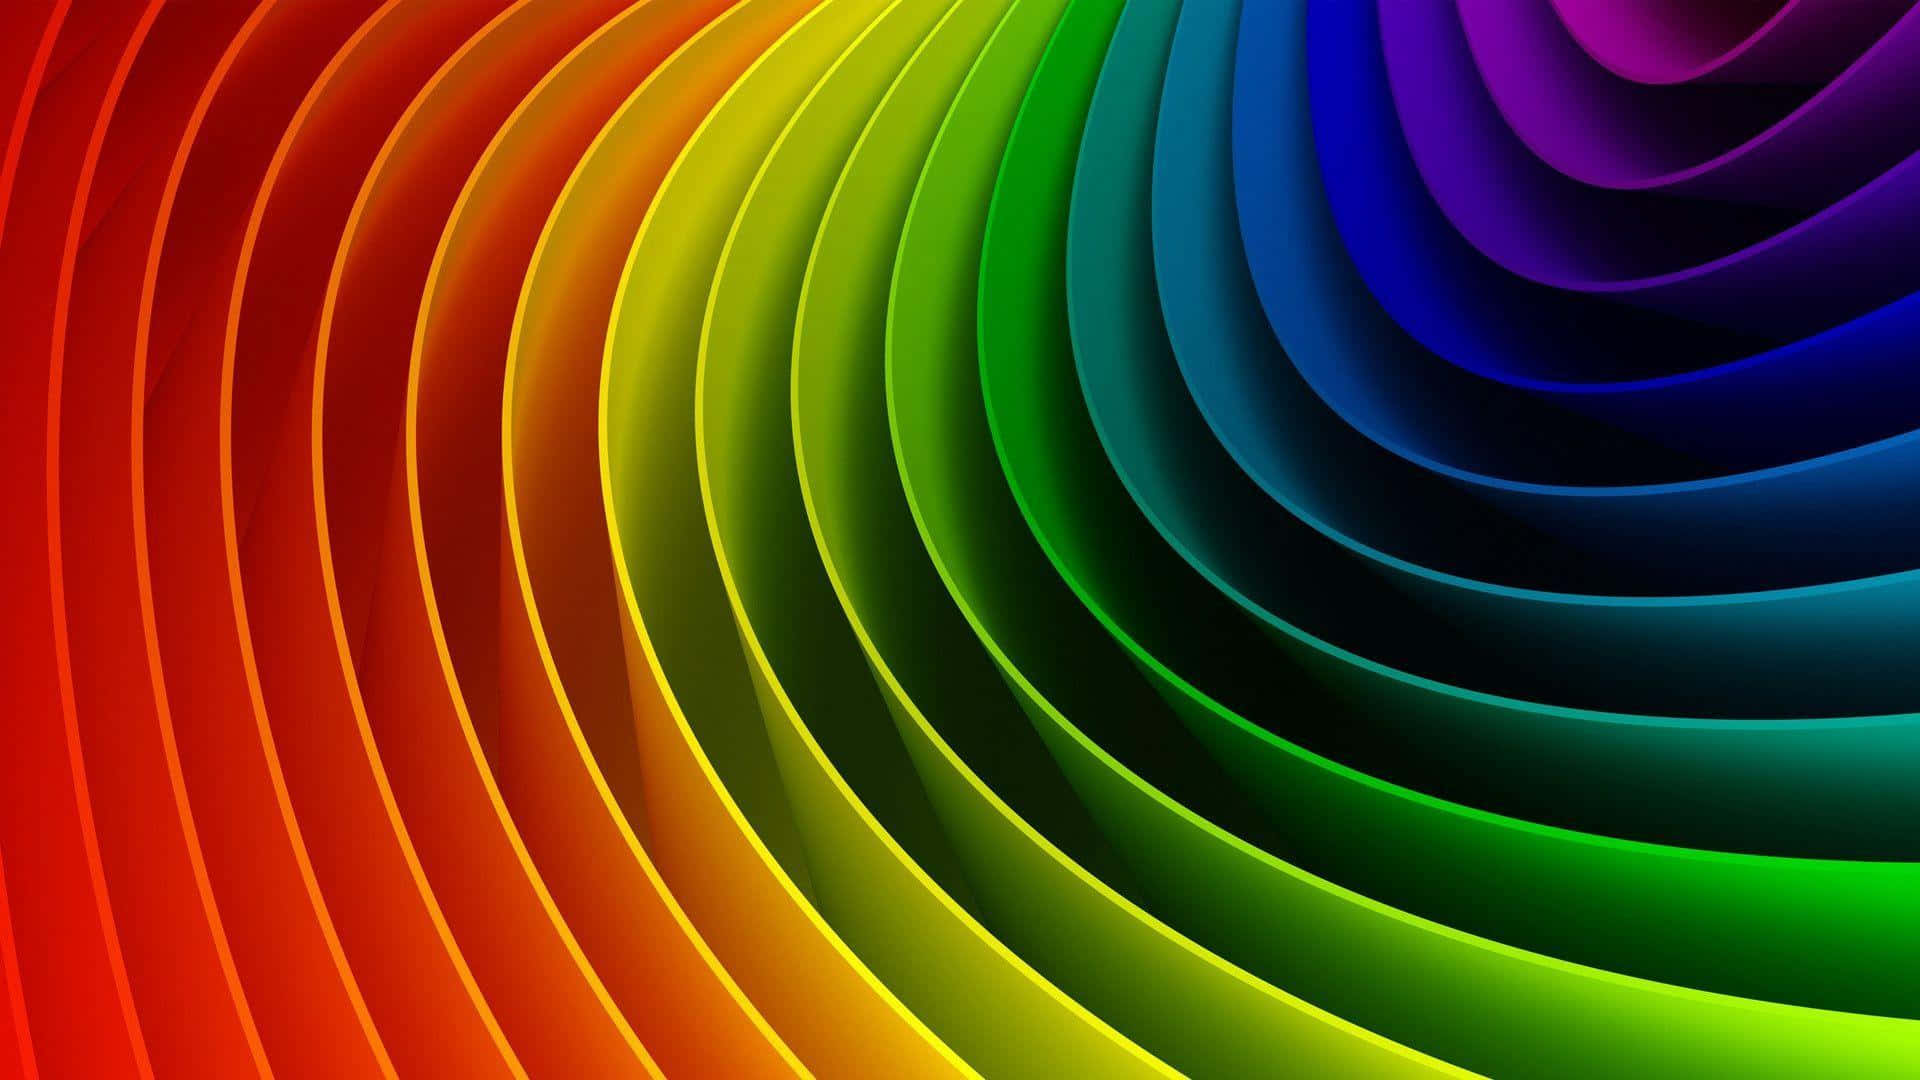 Vibrant Twists of Colour: A Rainbow Spiral Journey Wallpaper